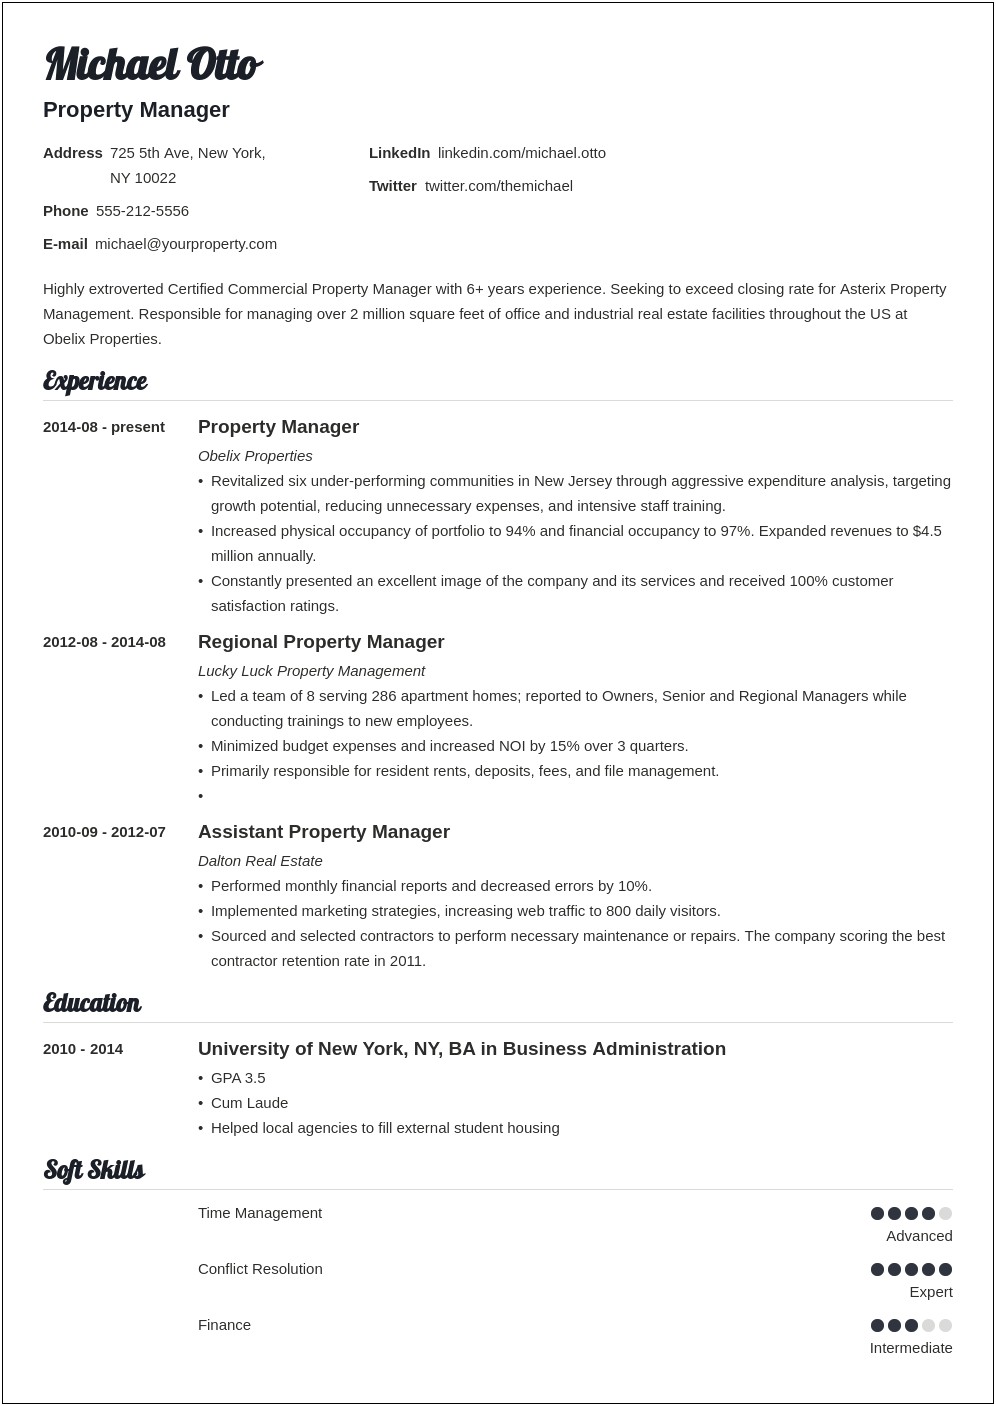 Resume Objective For Real Estate Assistant